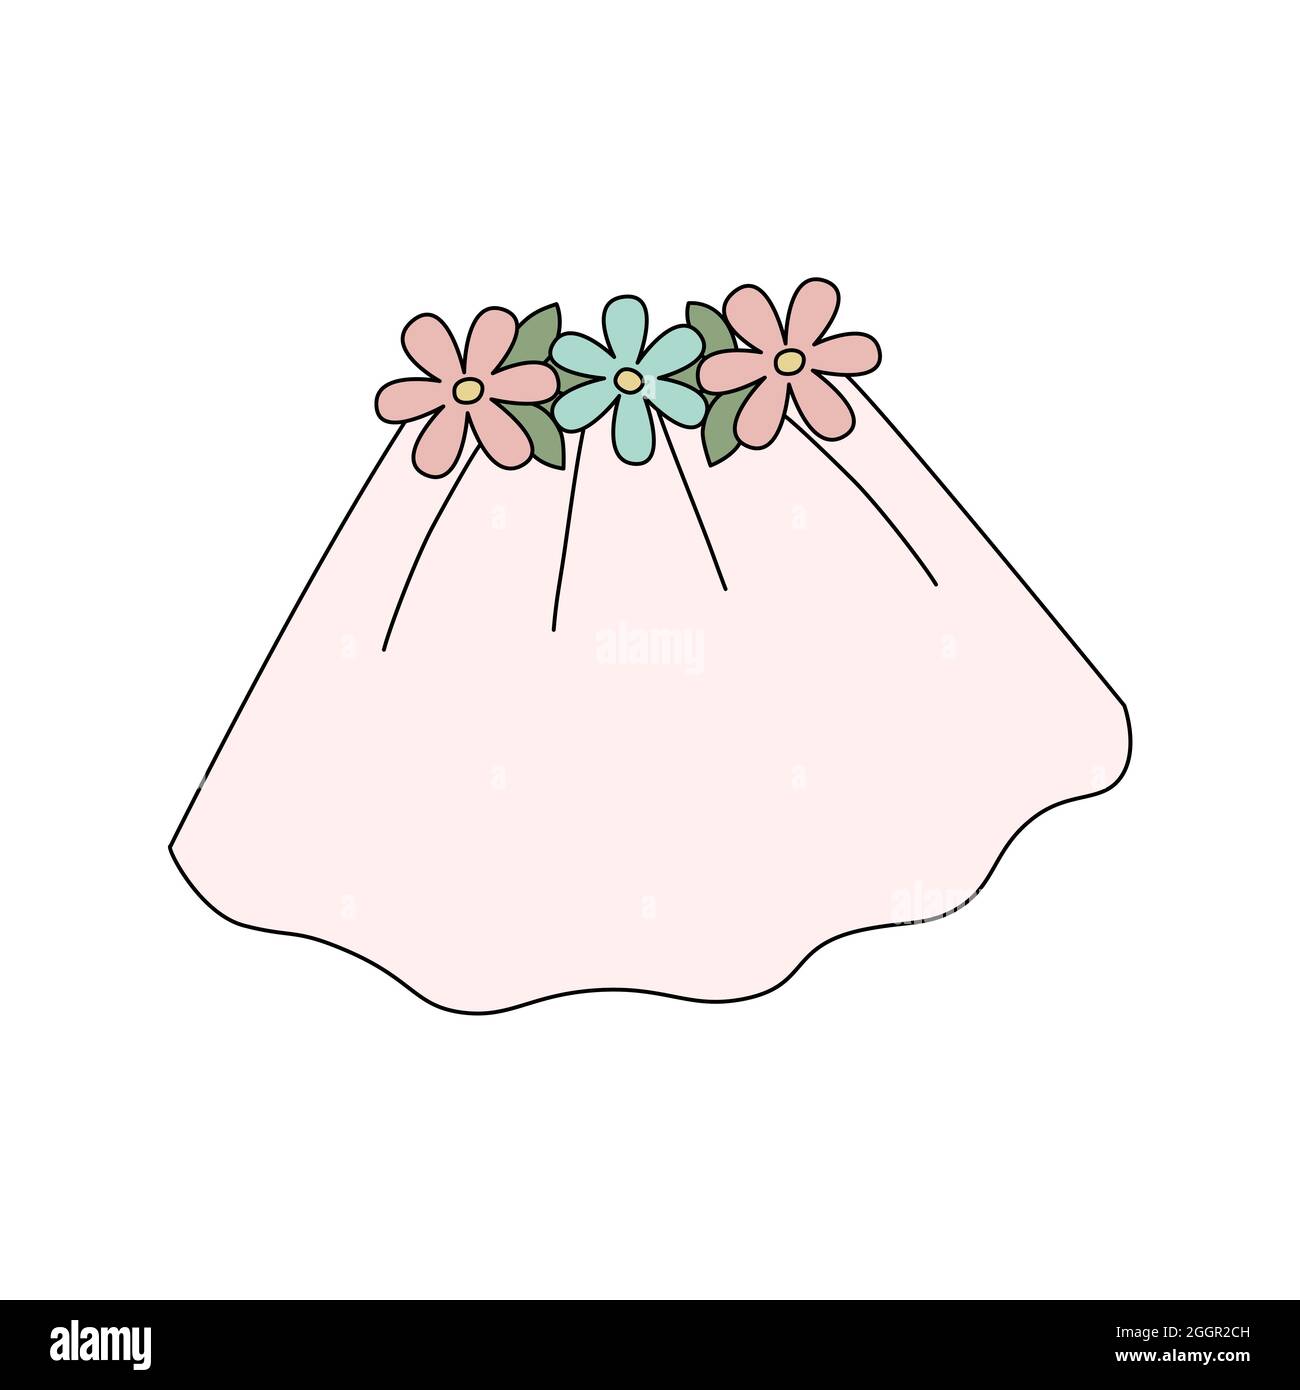 Wedding bridal veil with flower crown. Pastel vector illustration isolated on white background. Icon for bachelorette party. Design for hen party invi Stock Vector